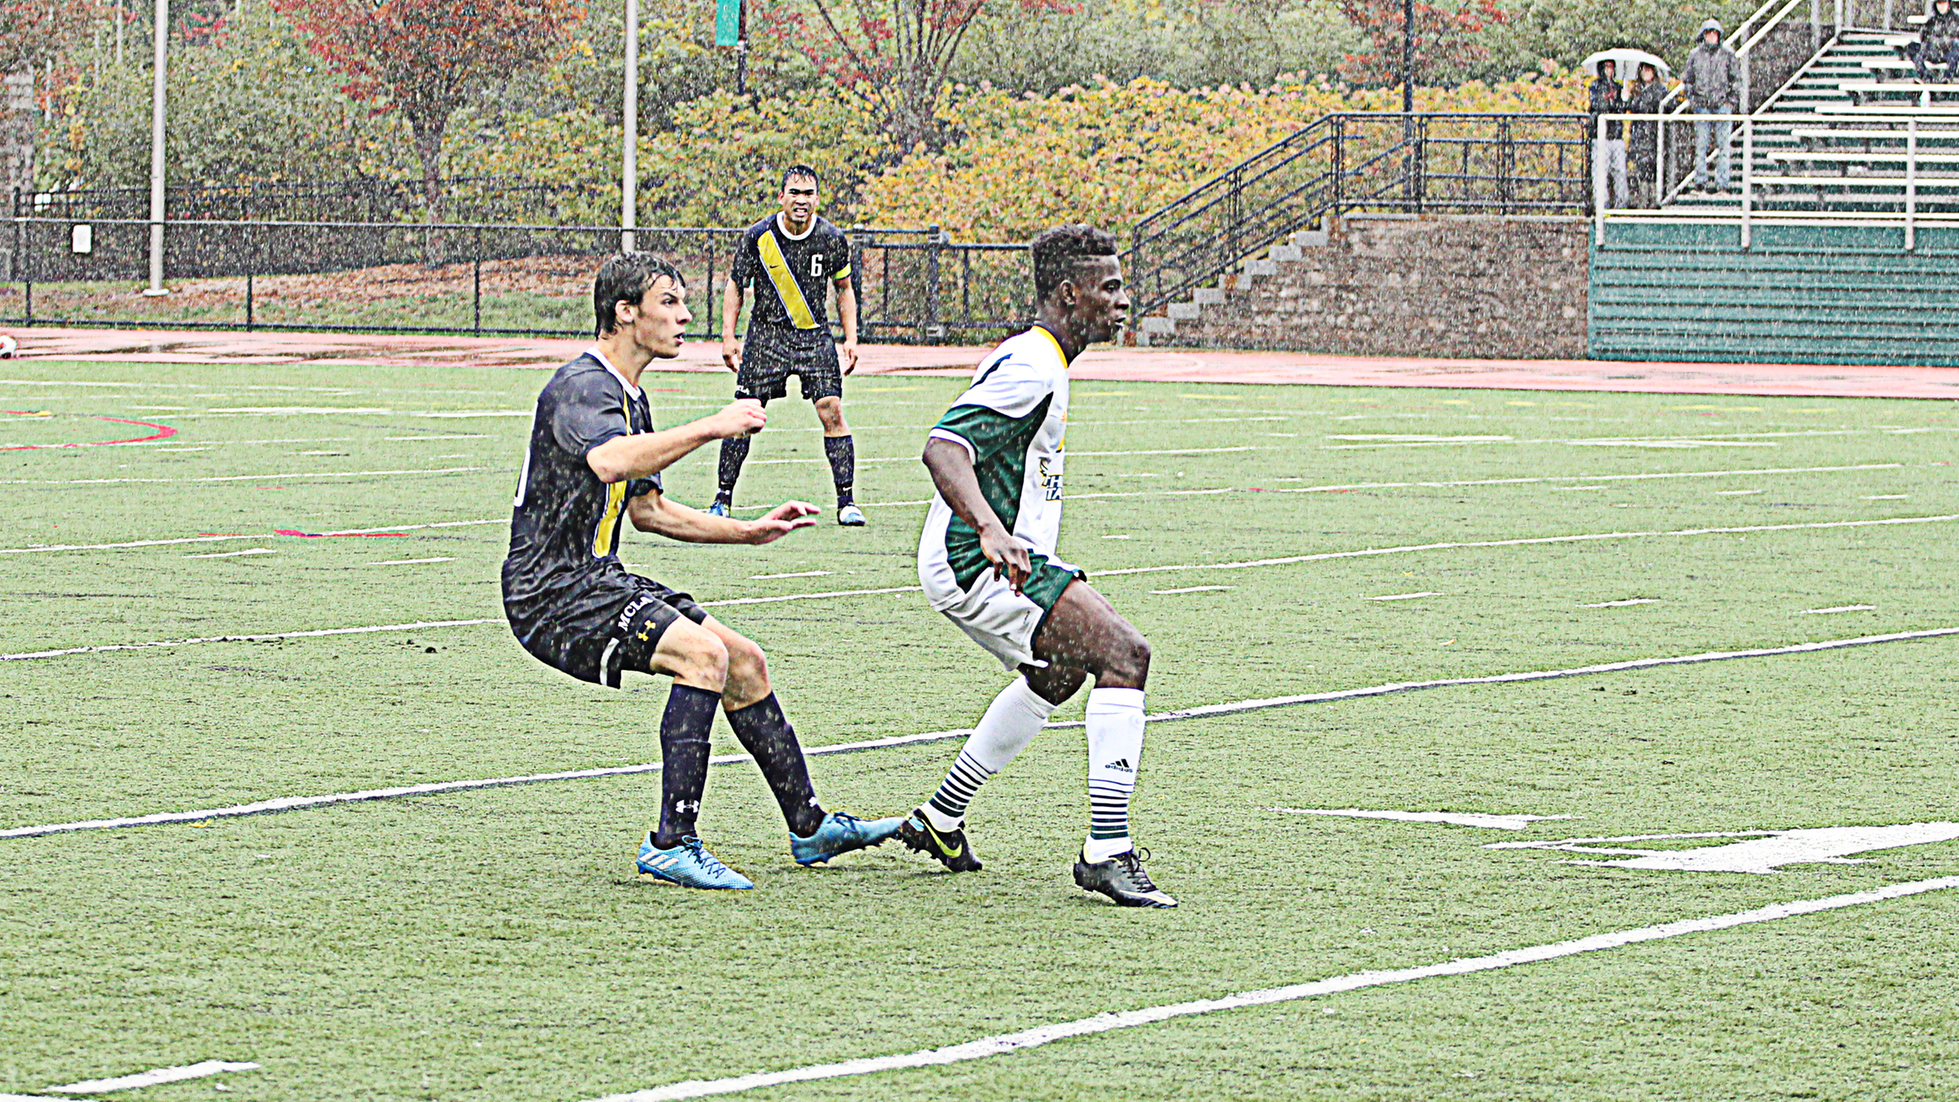 Westfield State Outlasts Fitchburg State, 1-0